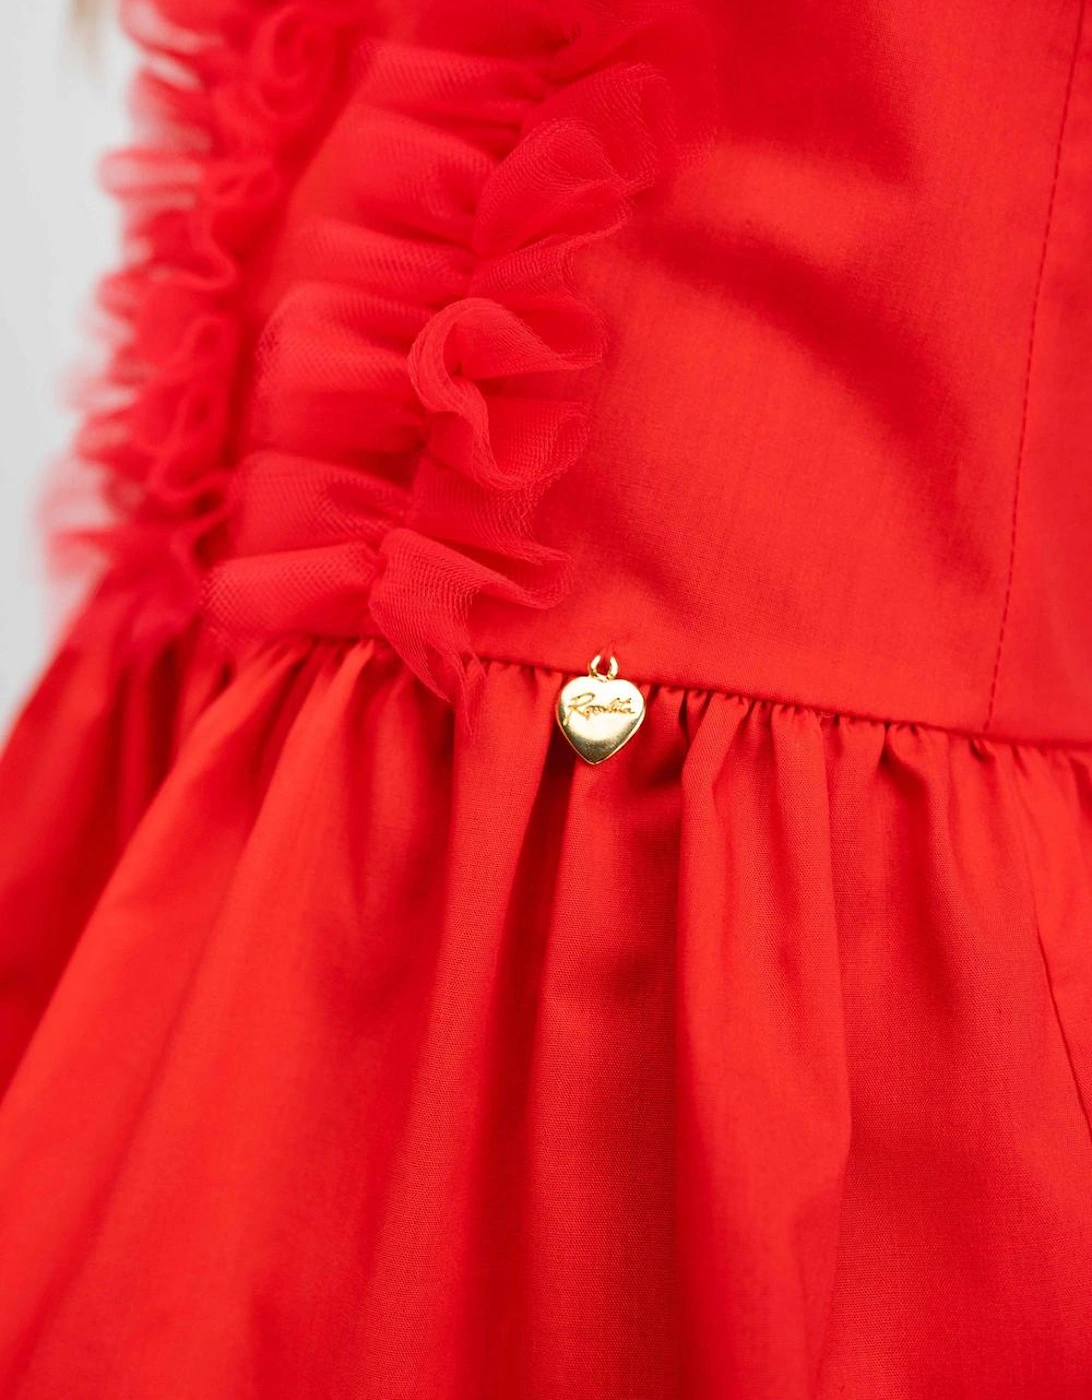 Red Tulle Shirt Dress